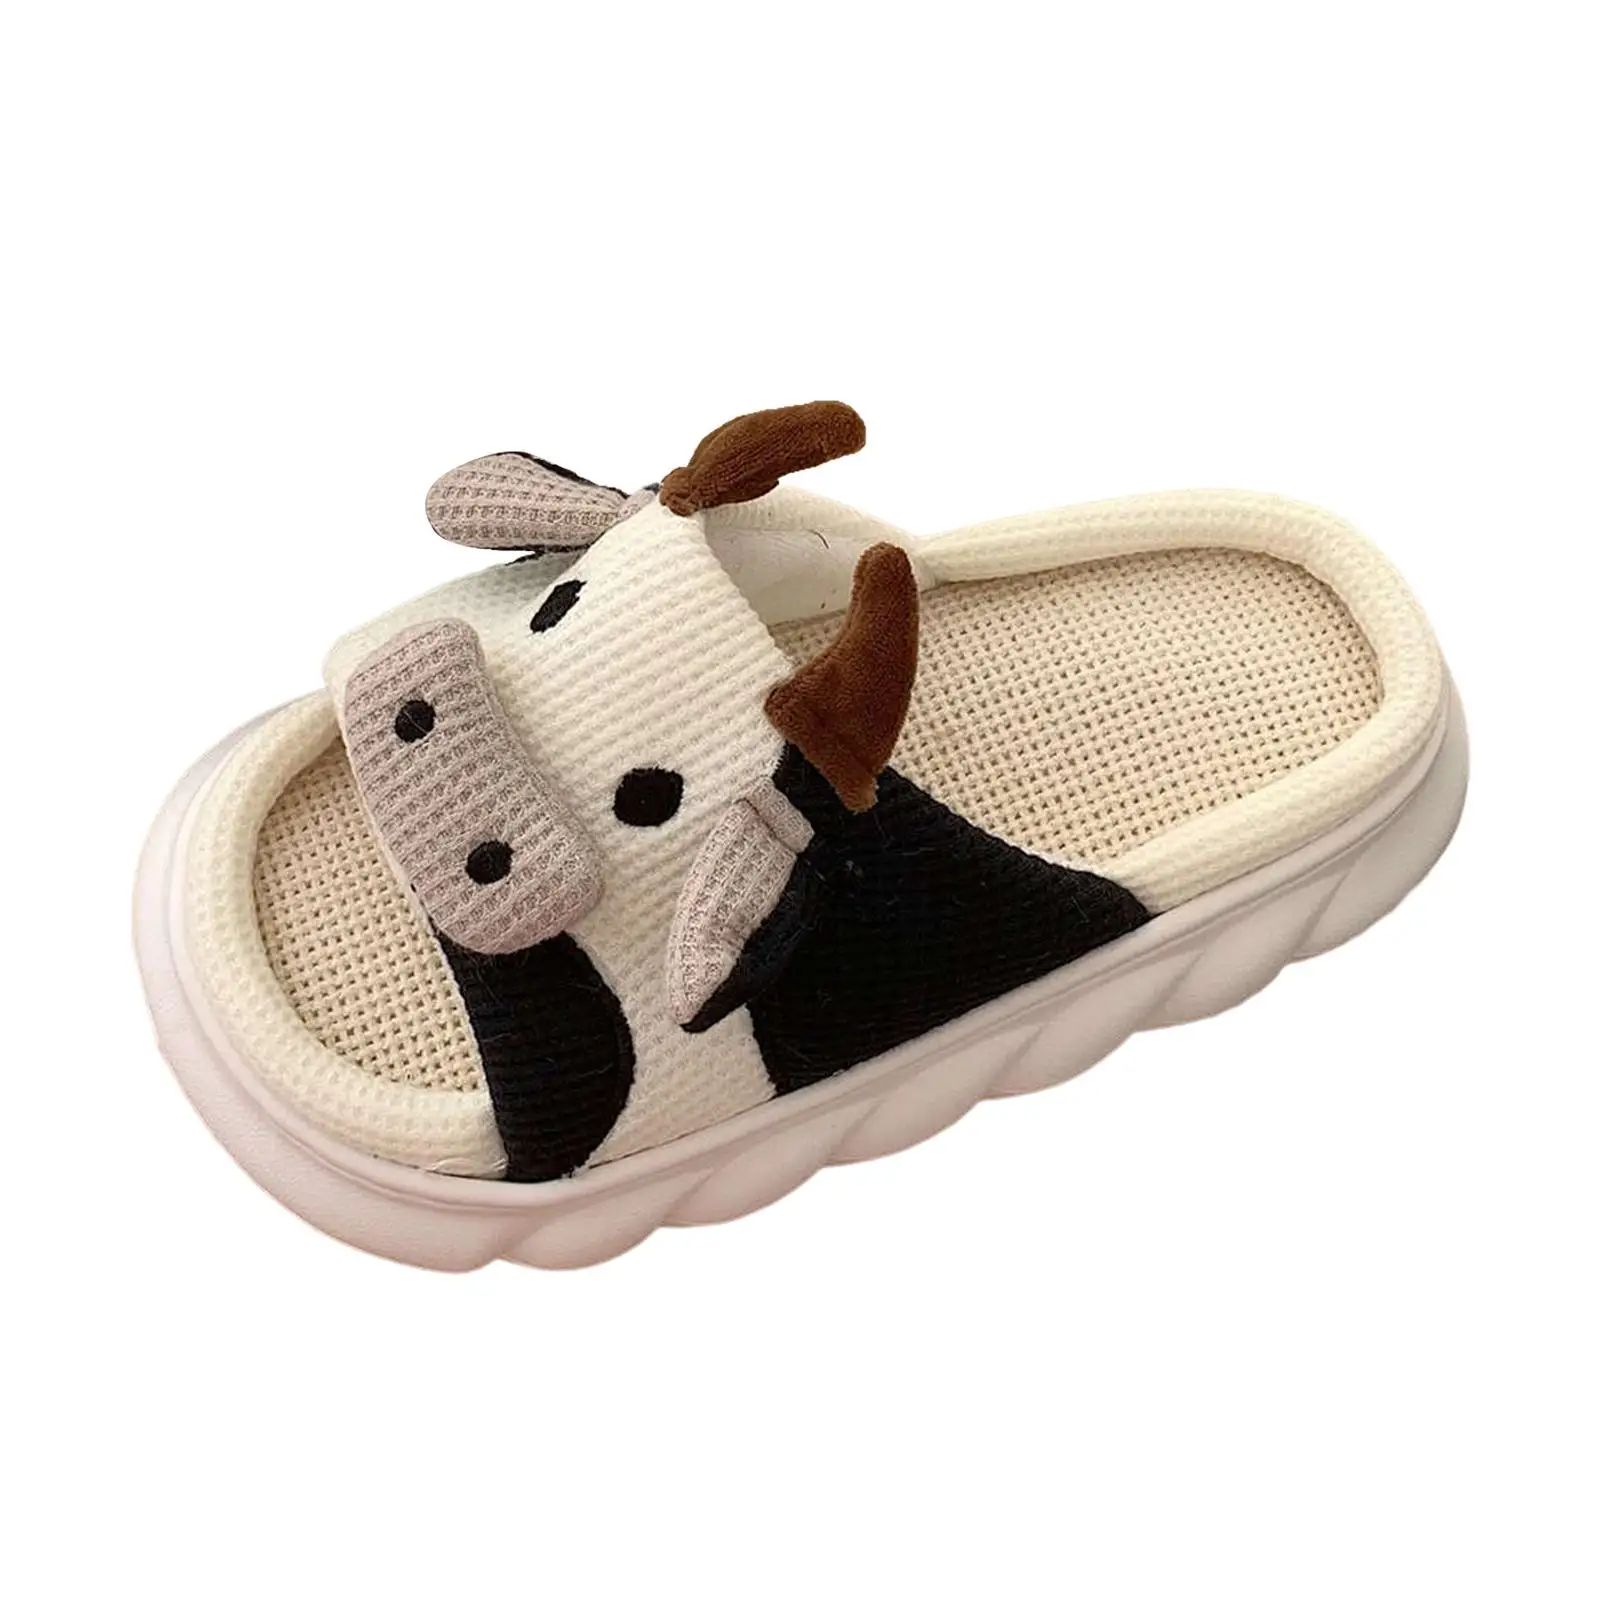 Cow Linen Cotton Slippers Soft Washable Flax Home Slippers for Indoor Outdoor Women Girls